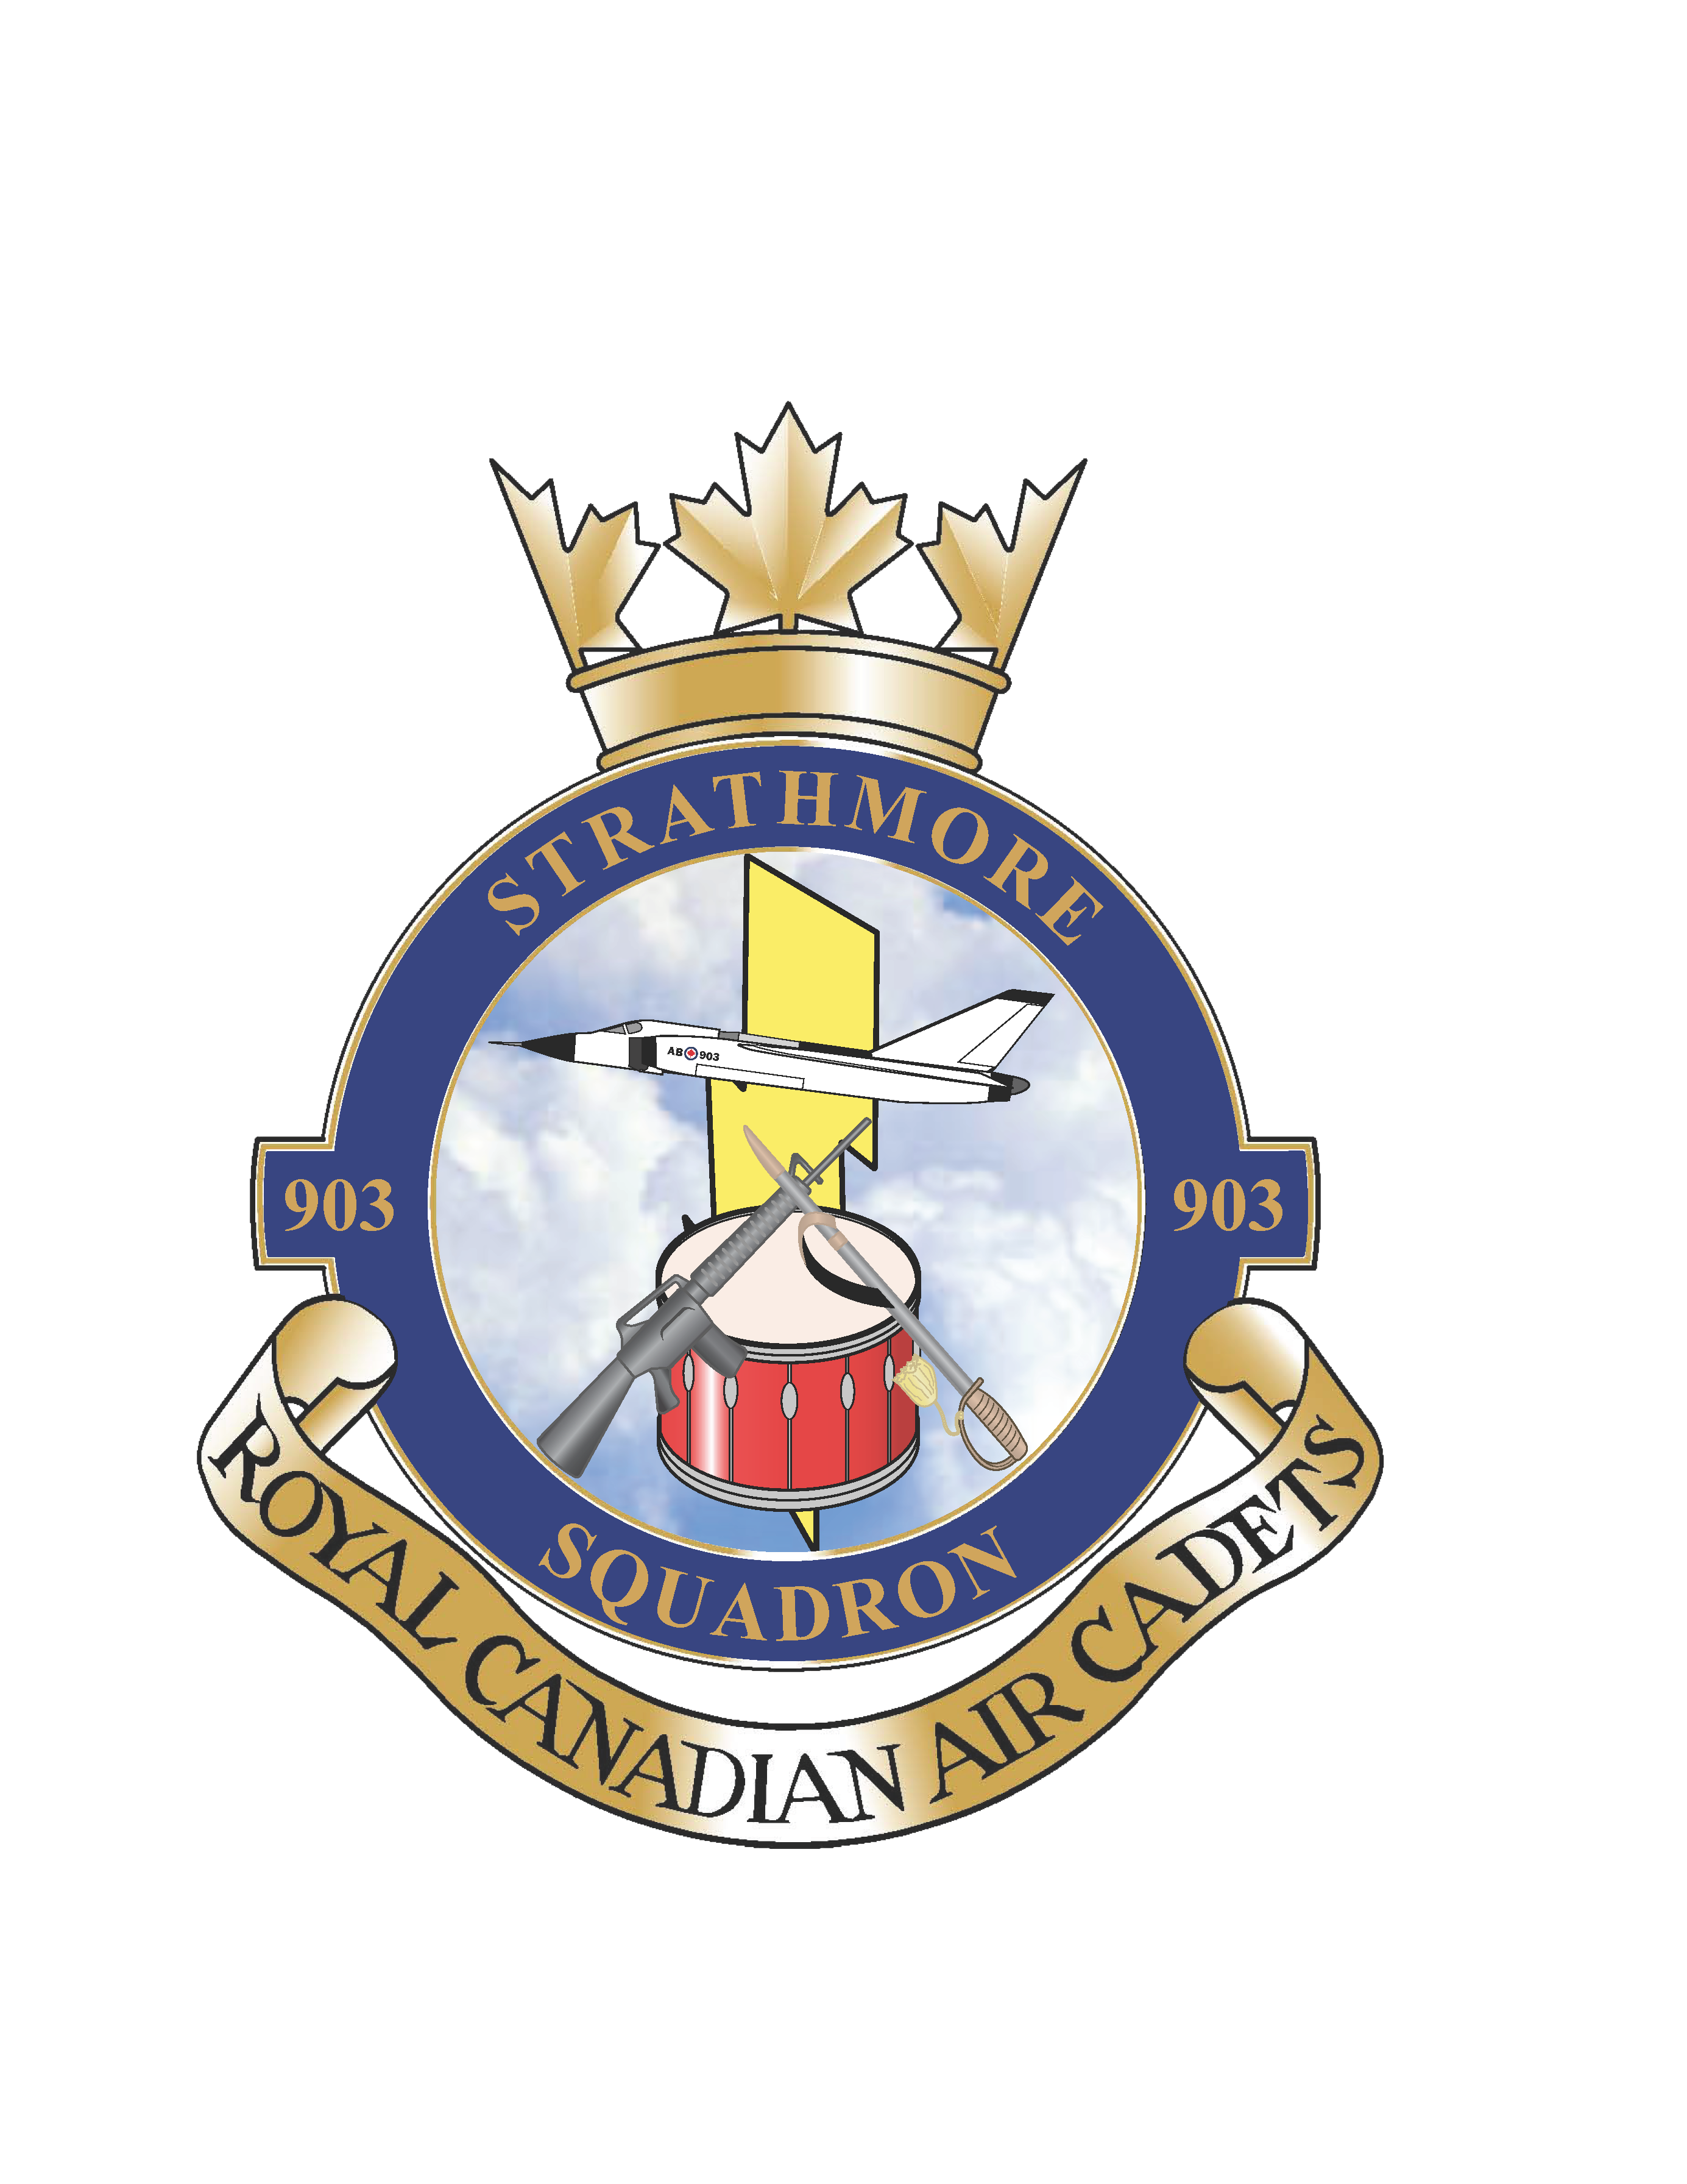 903 Strathmore Air cadets